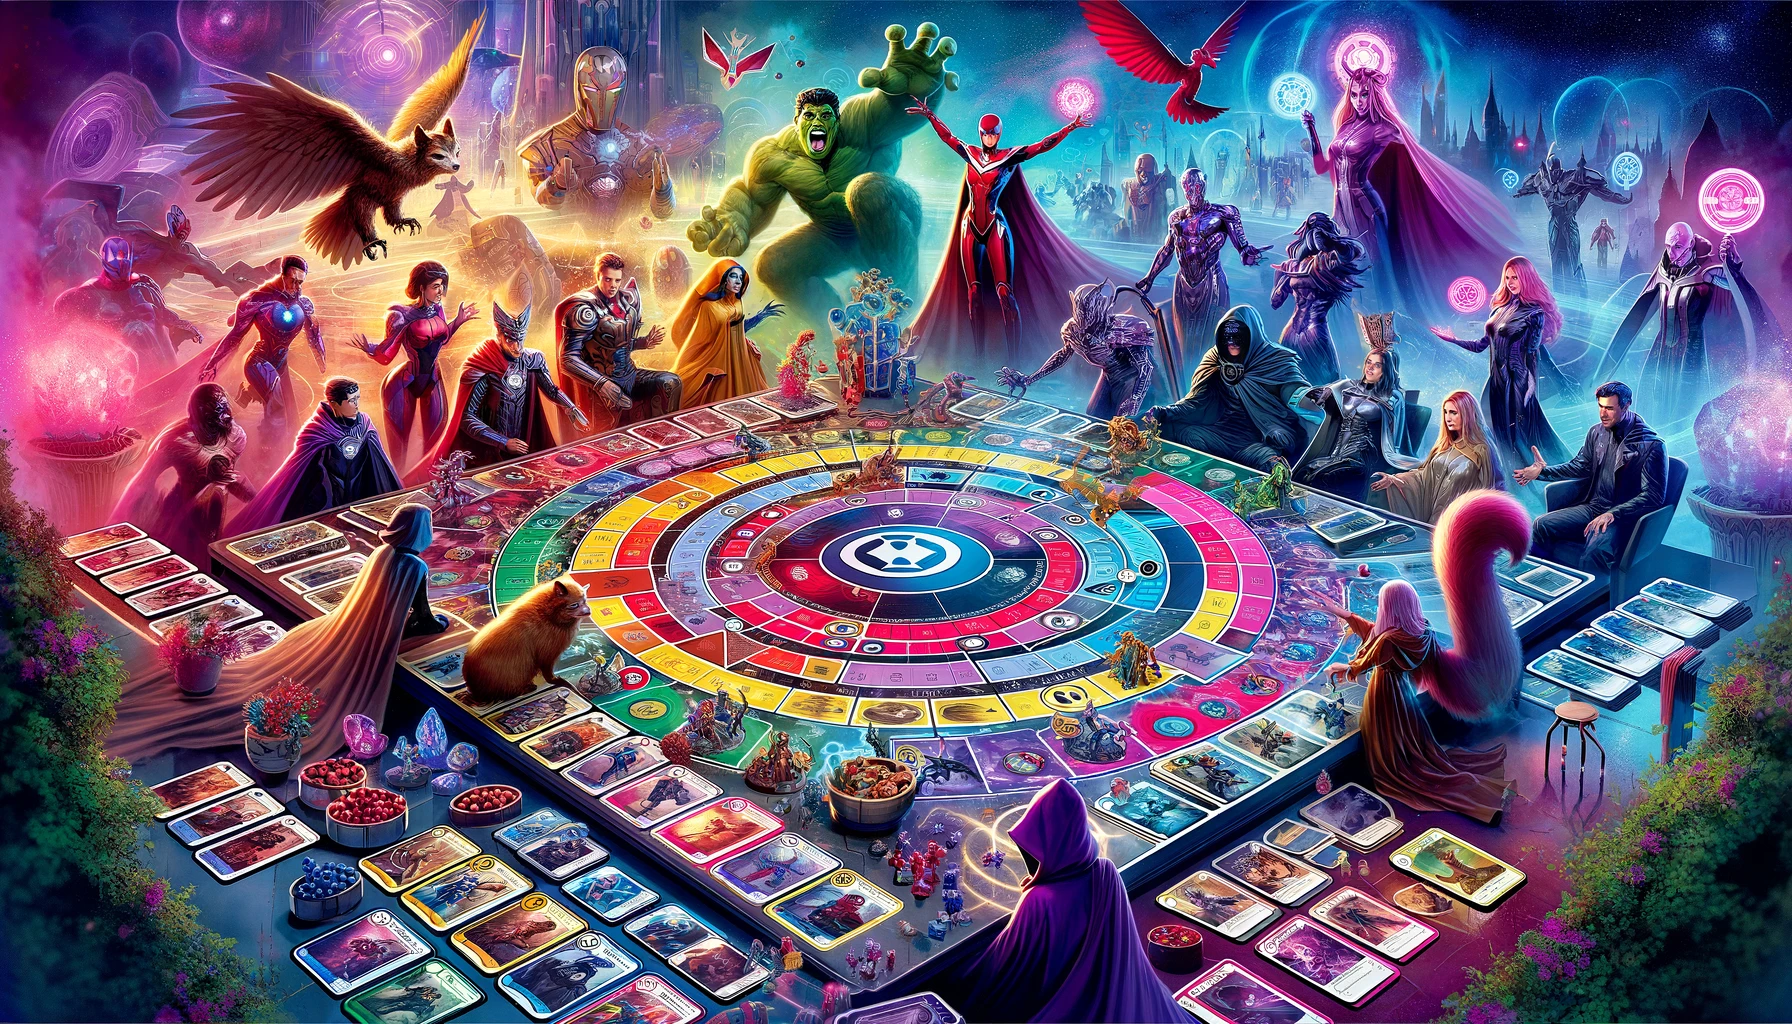 A vivid image of the gaming table and the surrounding players and fans. Cards are laid out on the table, and a selection of combinations is organized in the center.